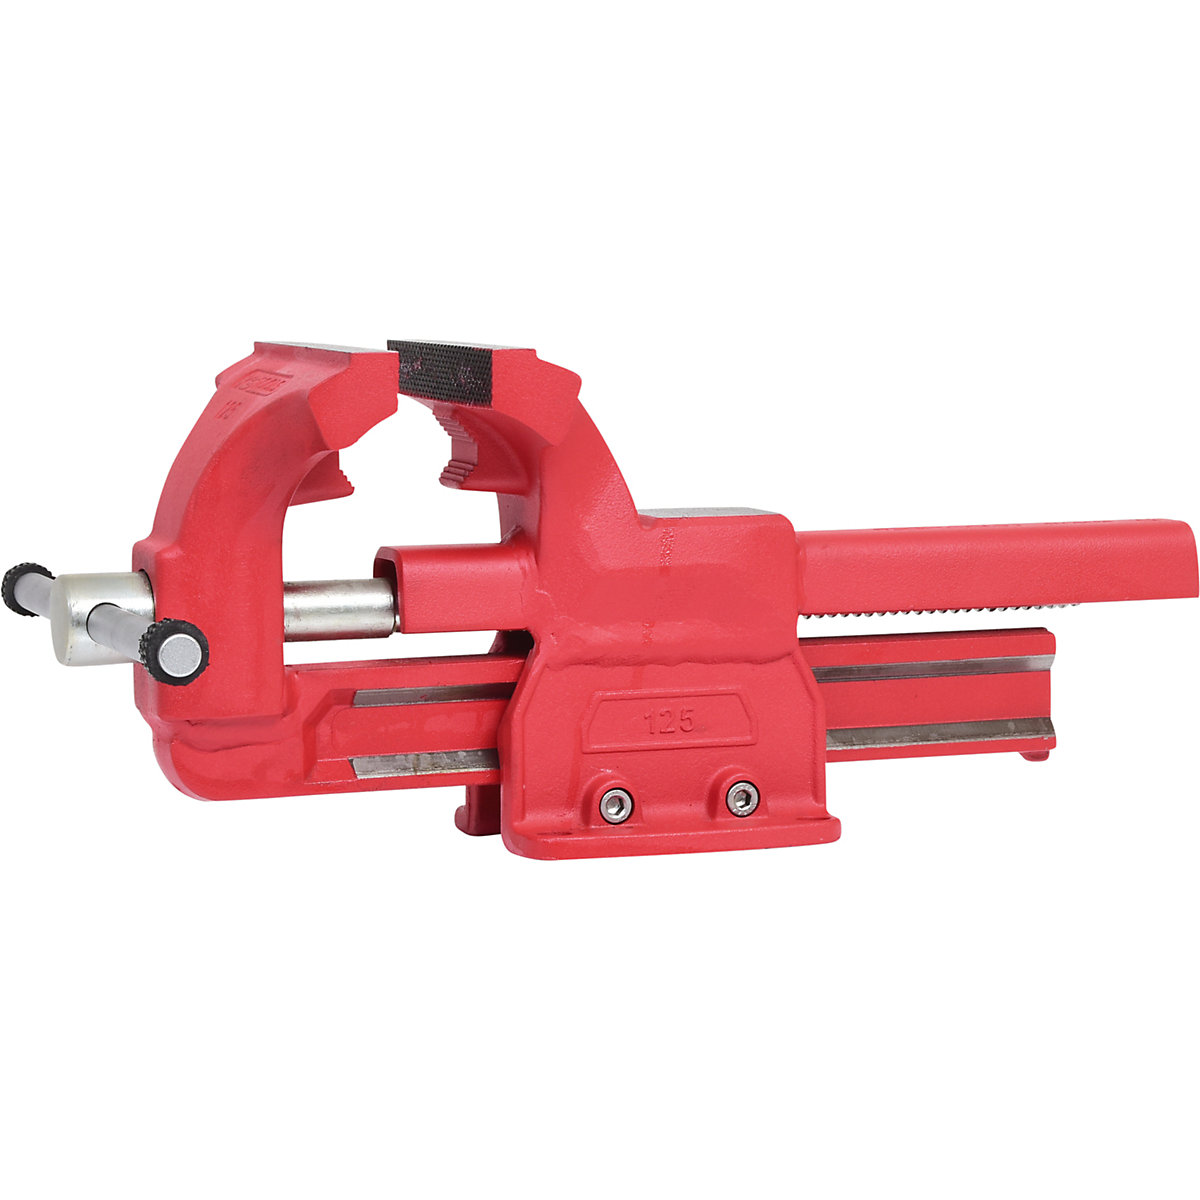 Parallel vice without round plate – KS Tools